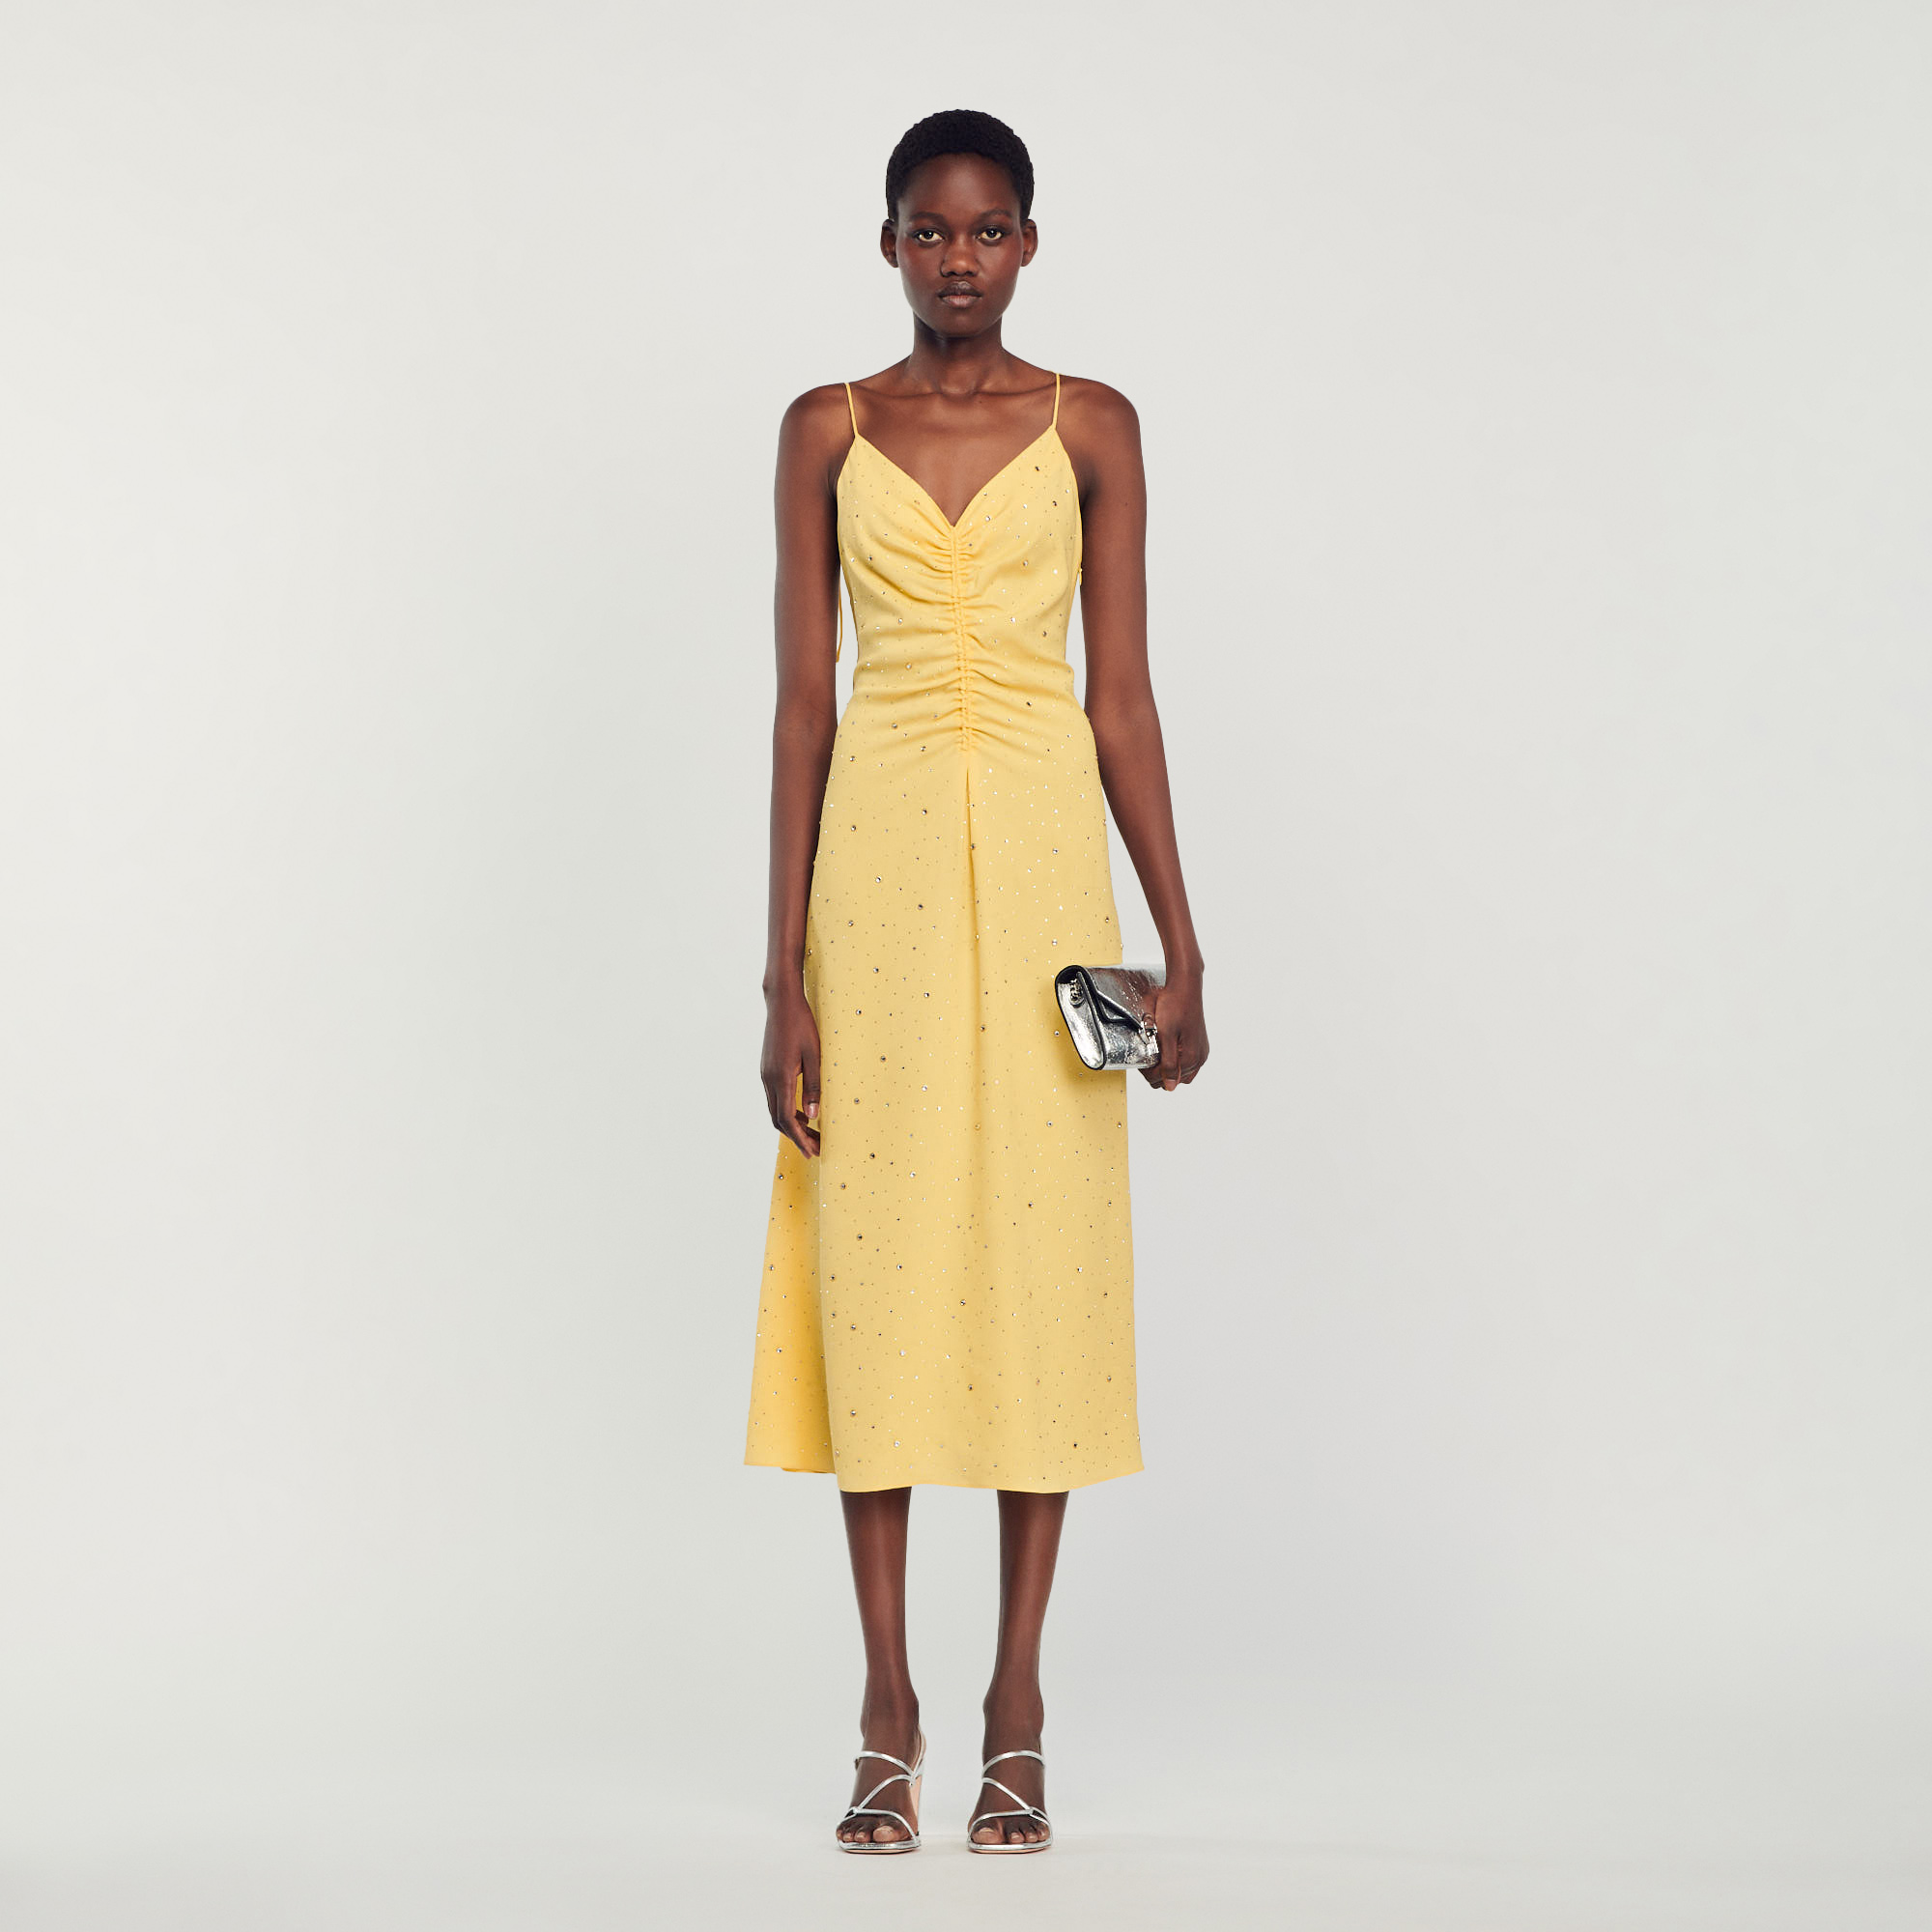 Sandro polyester Diamante: Long dress with a flared skirt, thin crossover straps tied at the back, a gathered plunging neckline, and all-over rhinestones